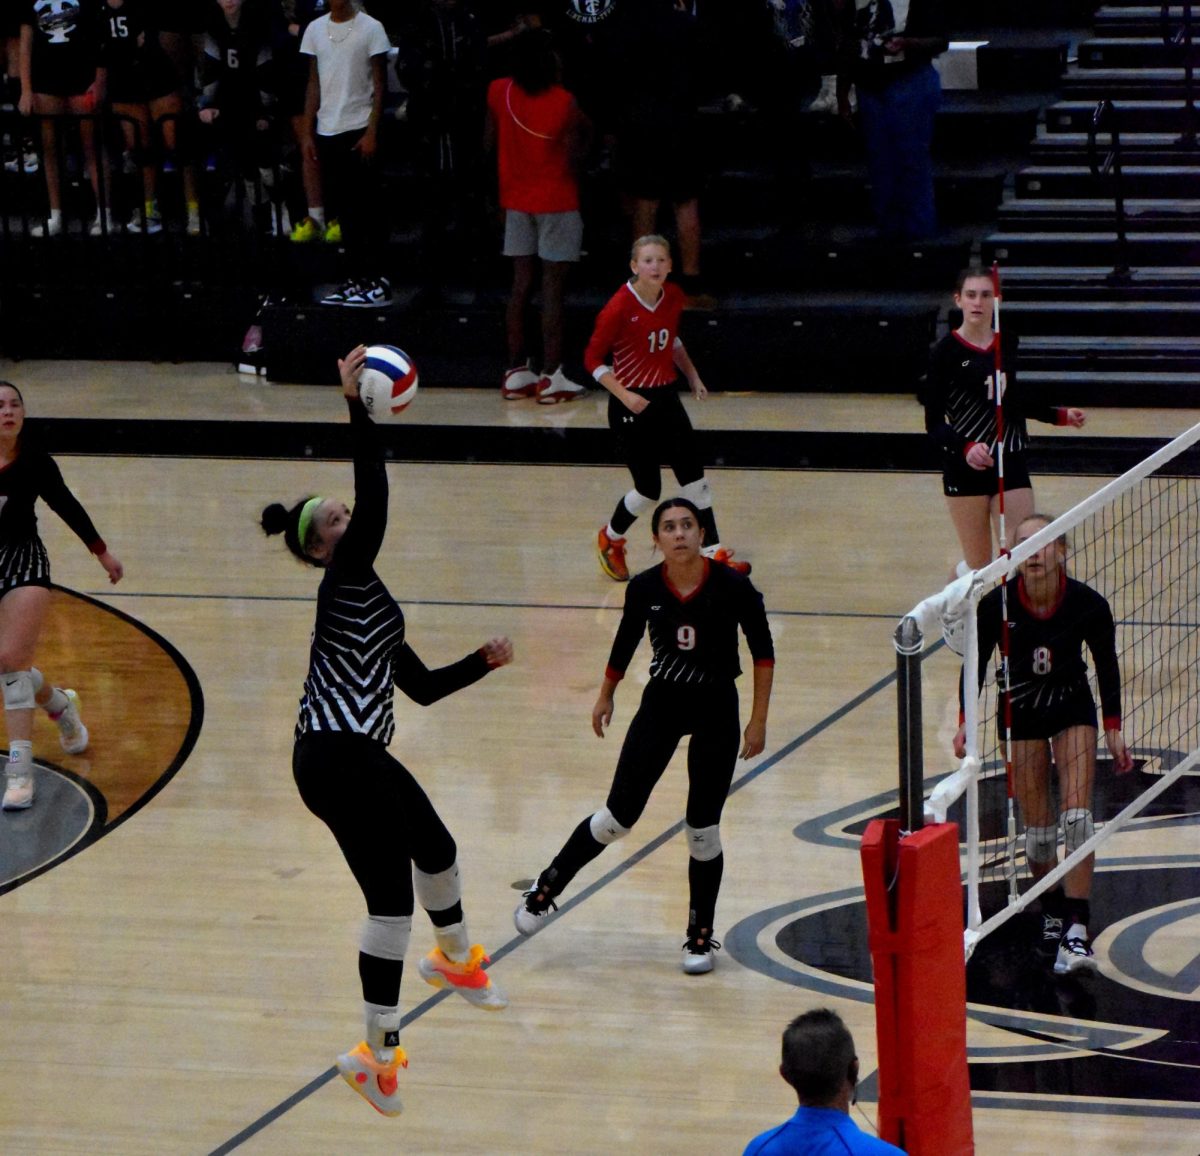 One of the shot plays, Set by Elle Benz and Spiked By Avery Summerlin. 